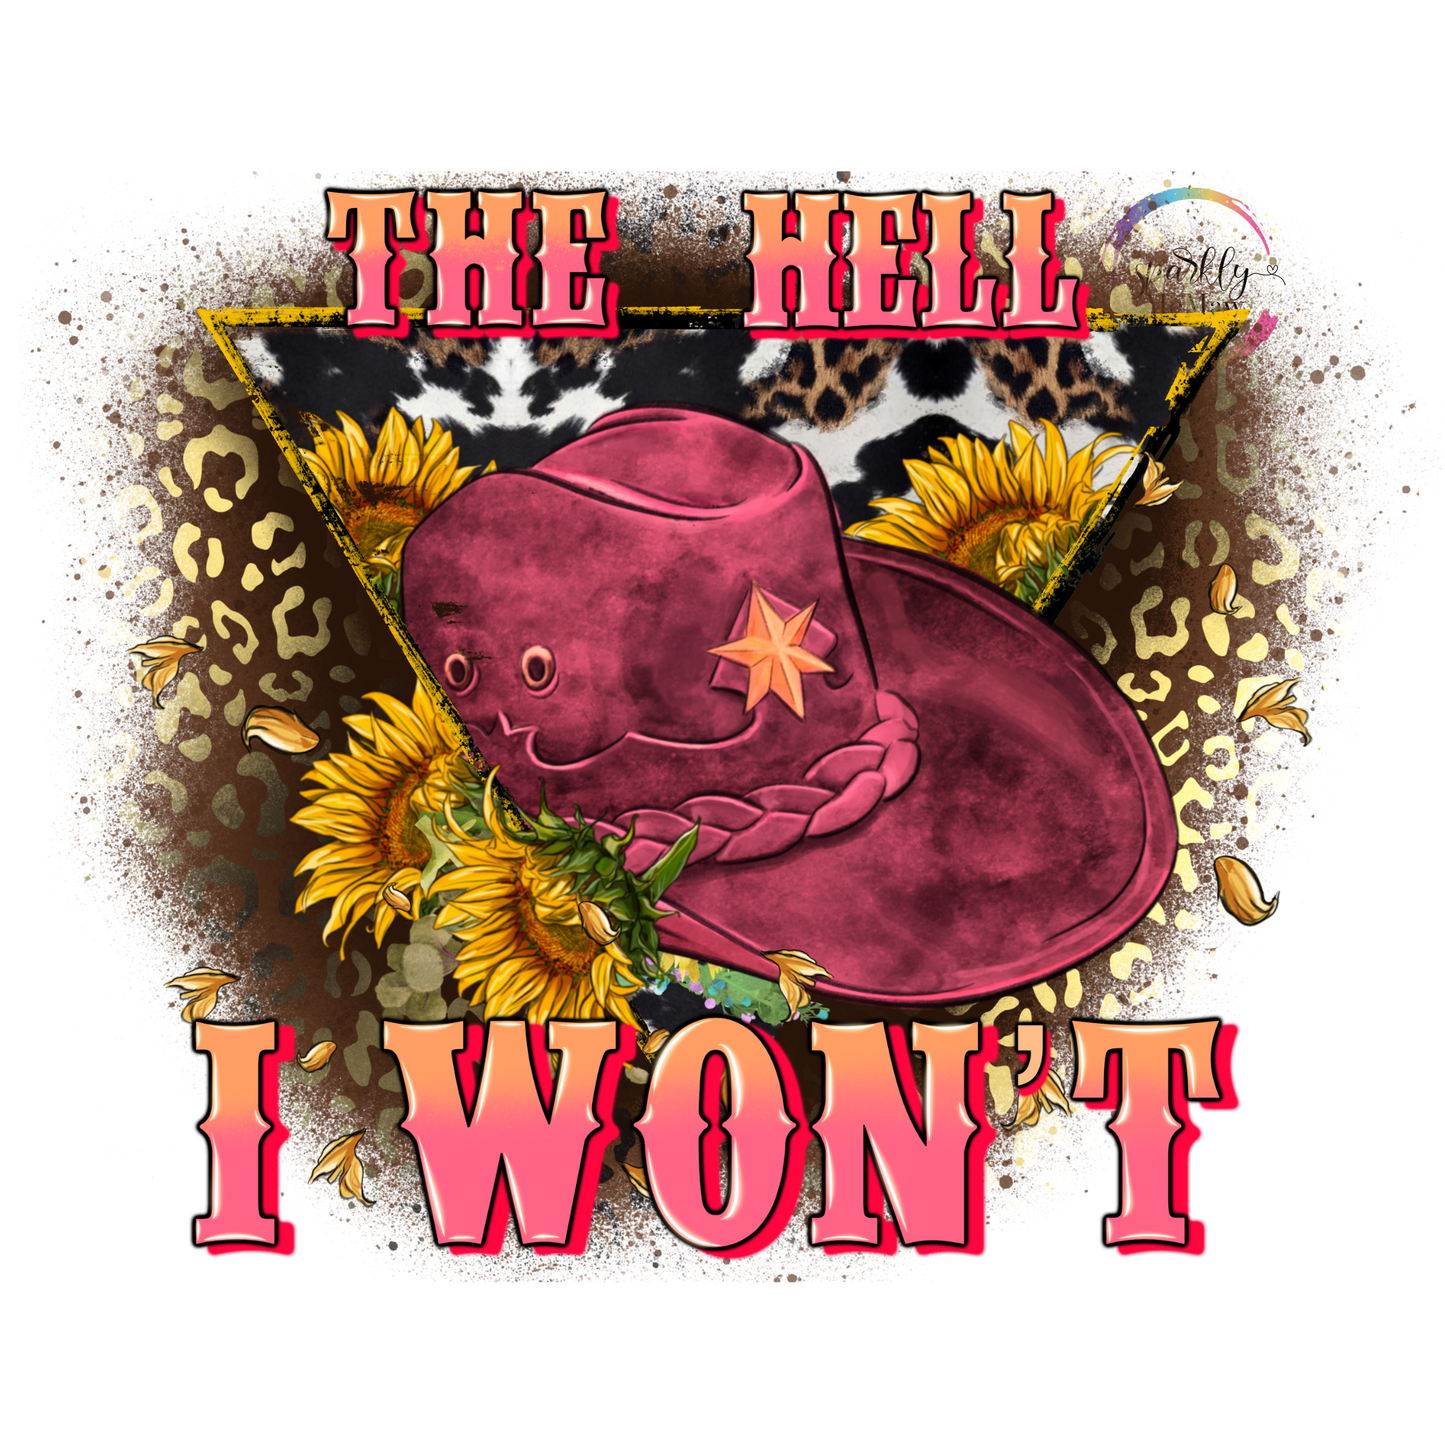 The Hell I won't UV Decal 4 x 4.5